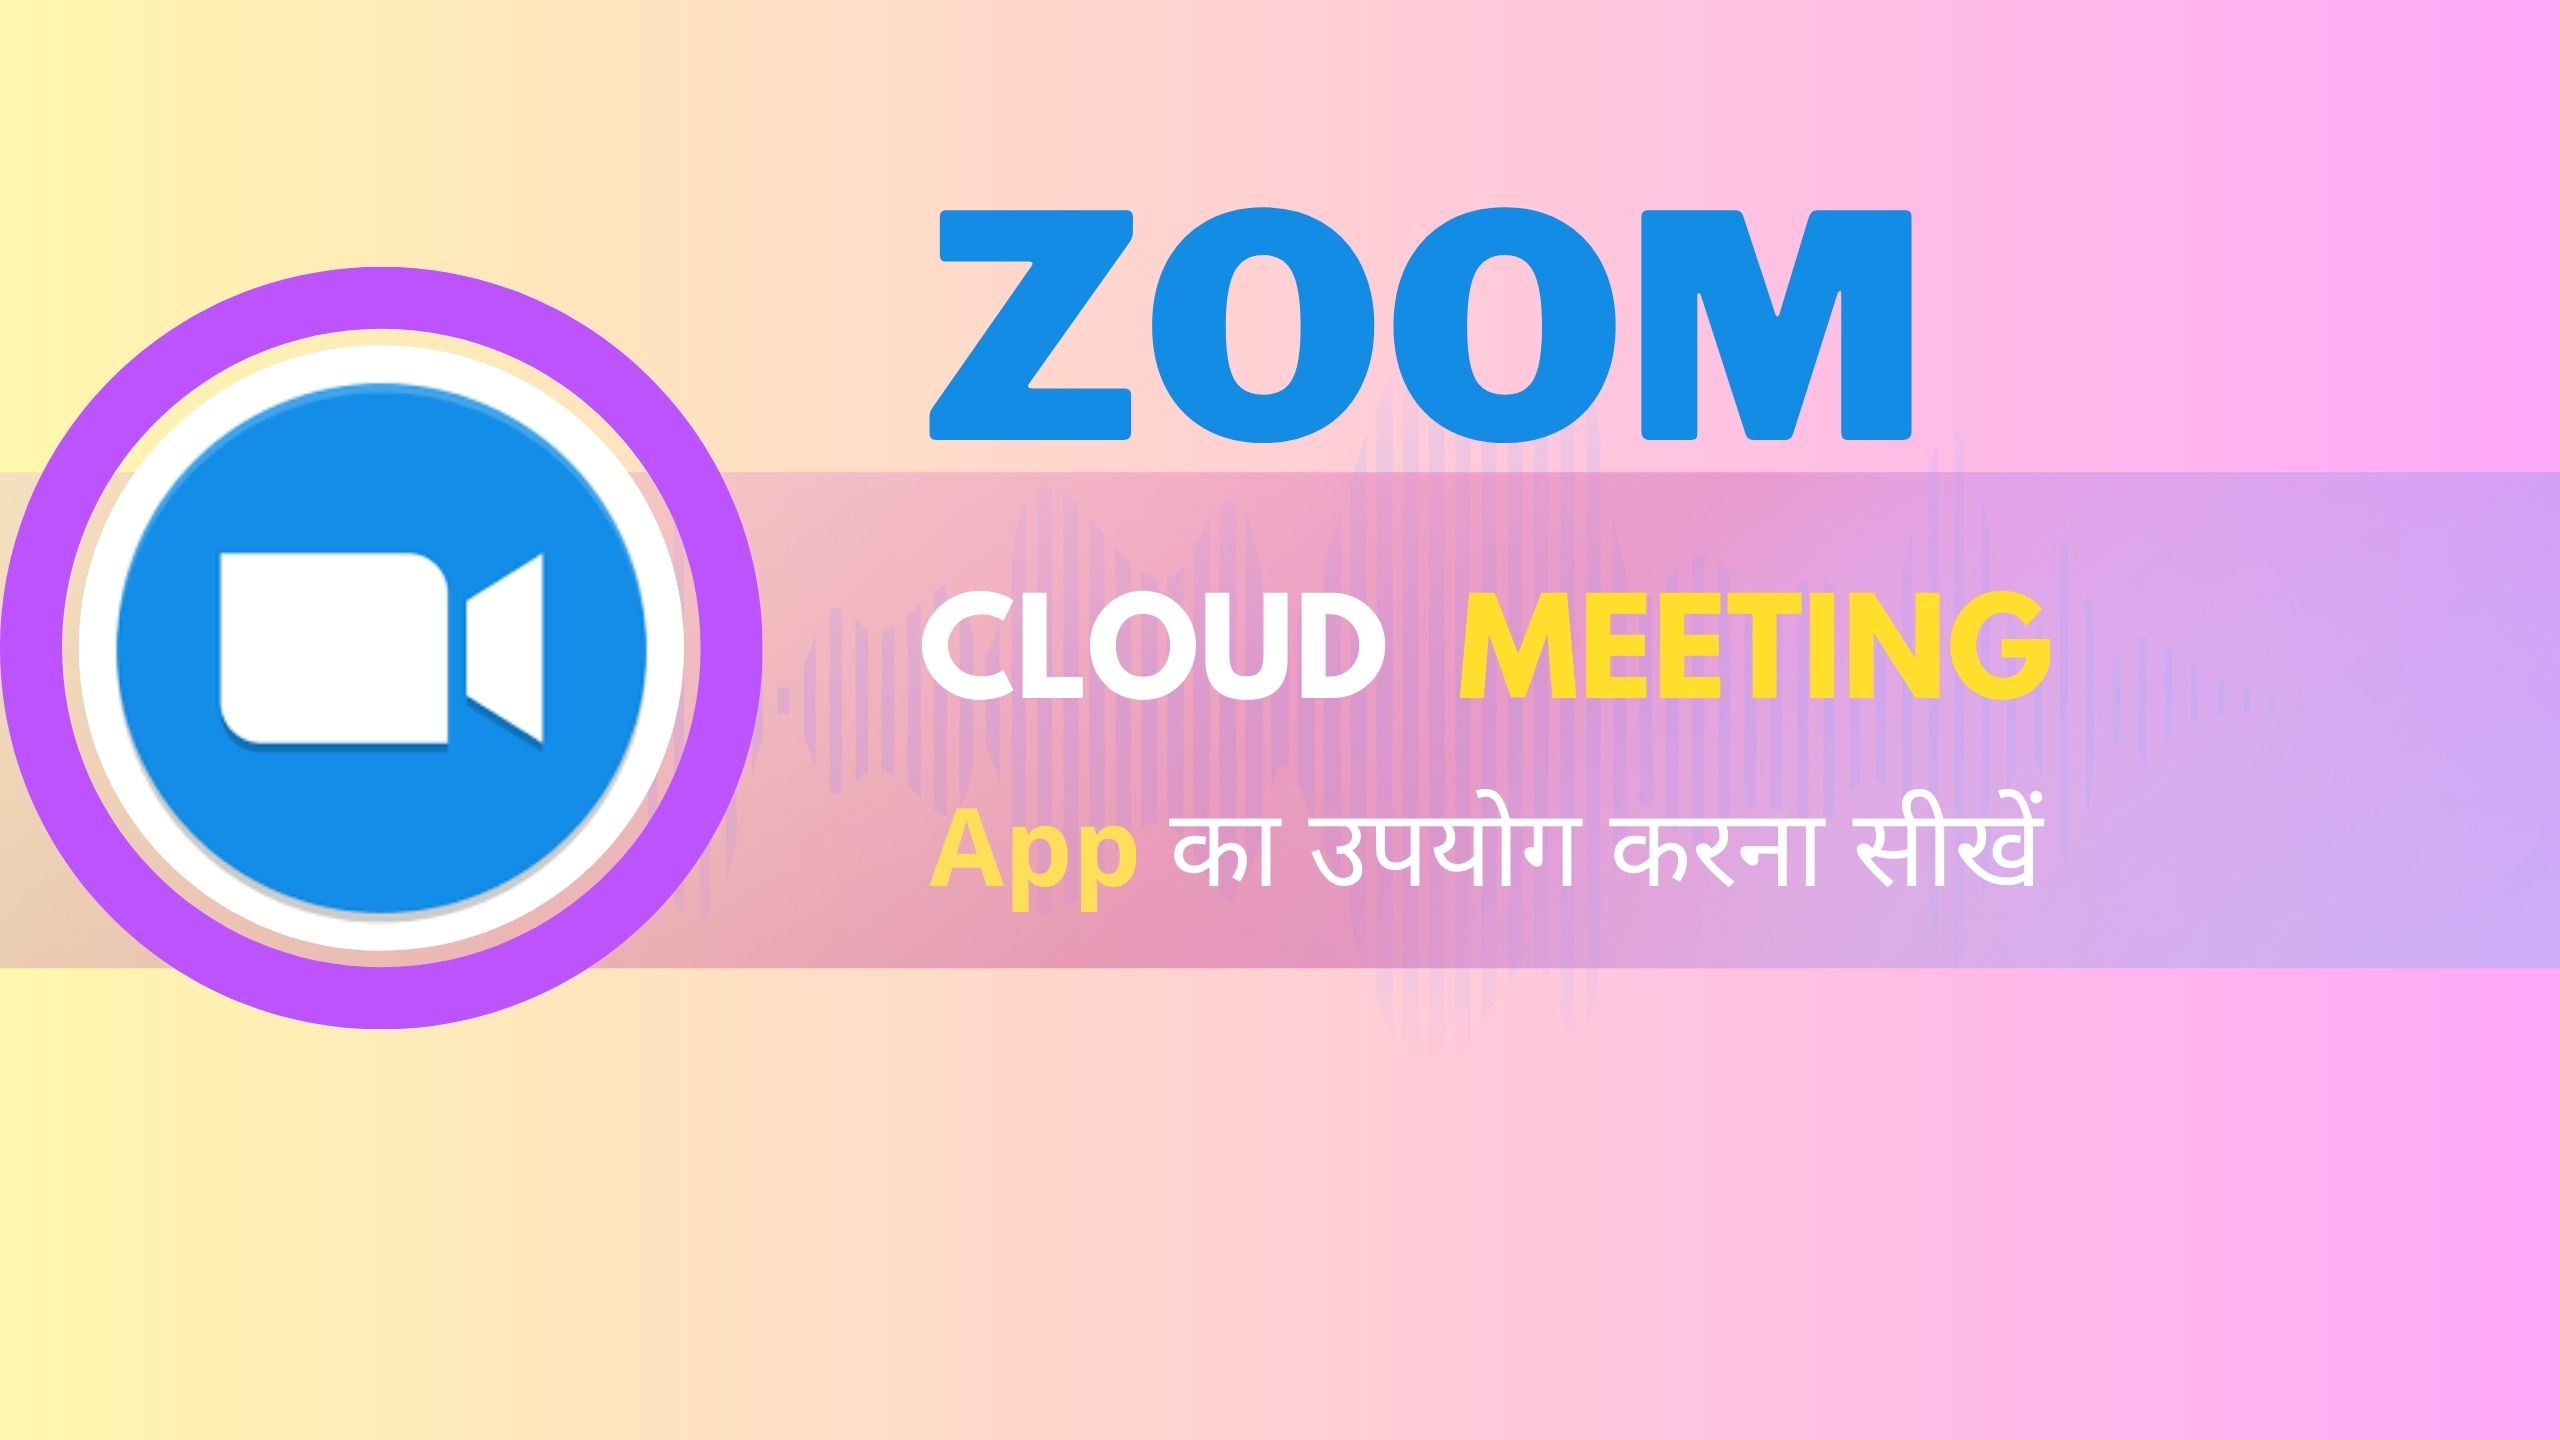 How to create zoom app account